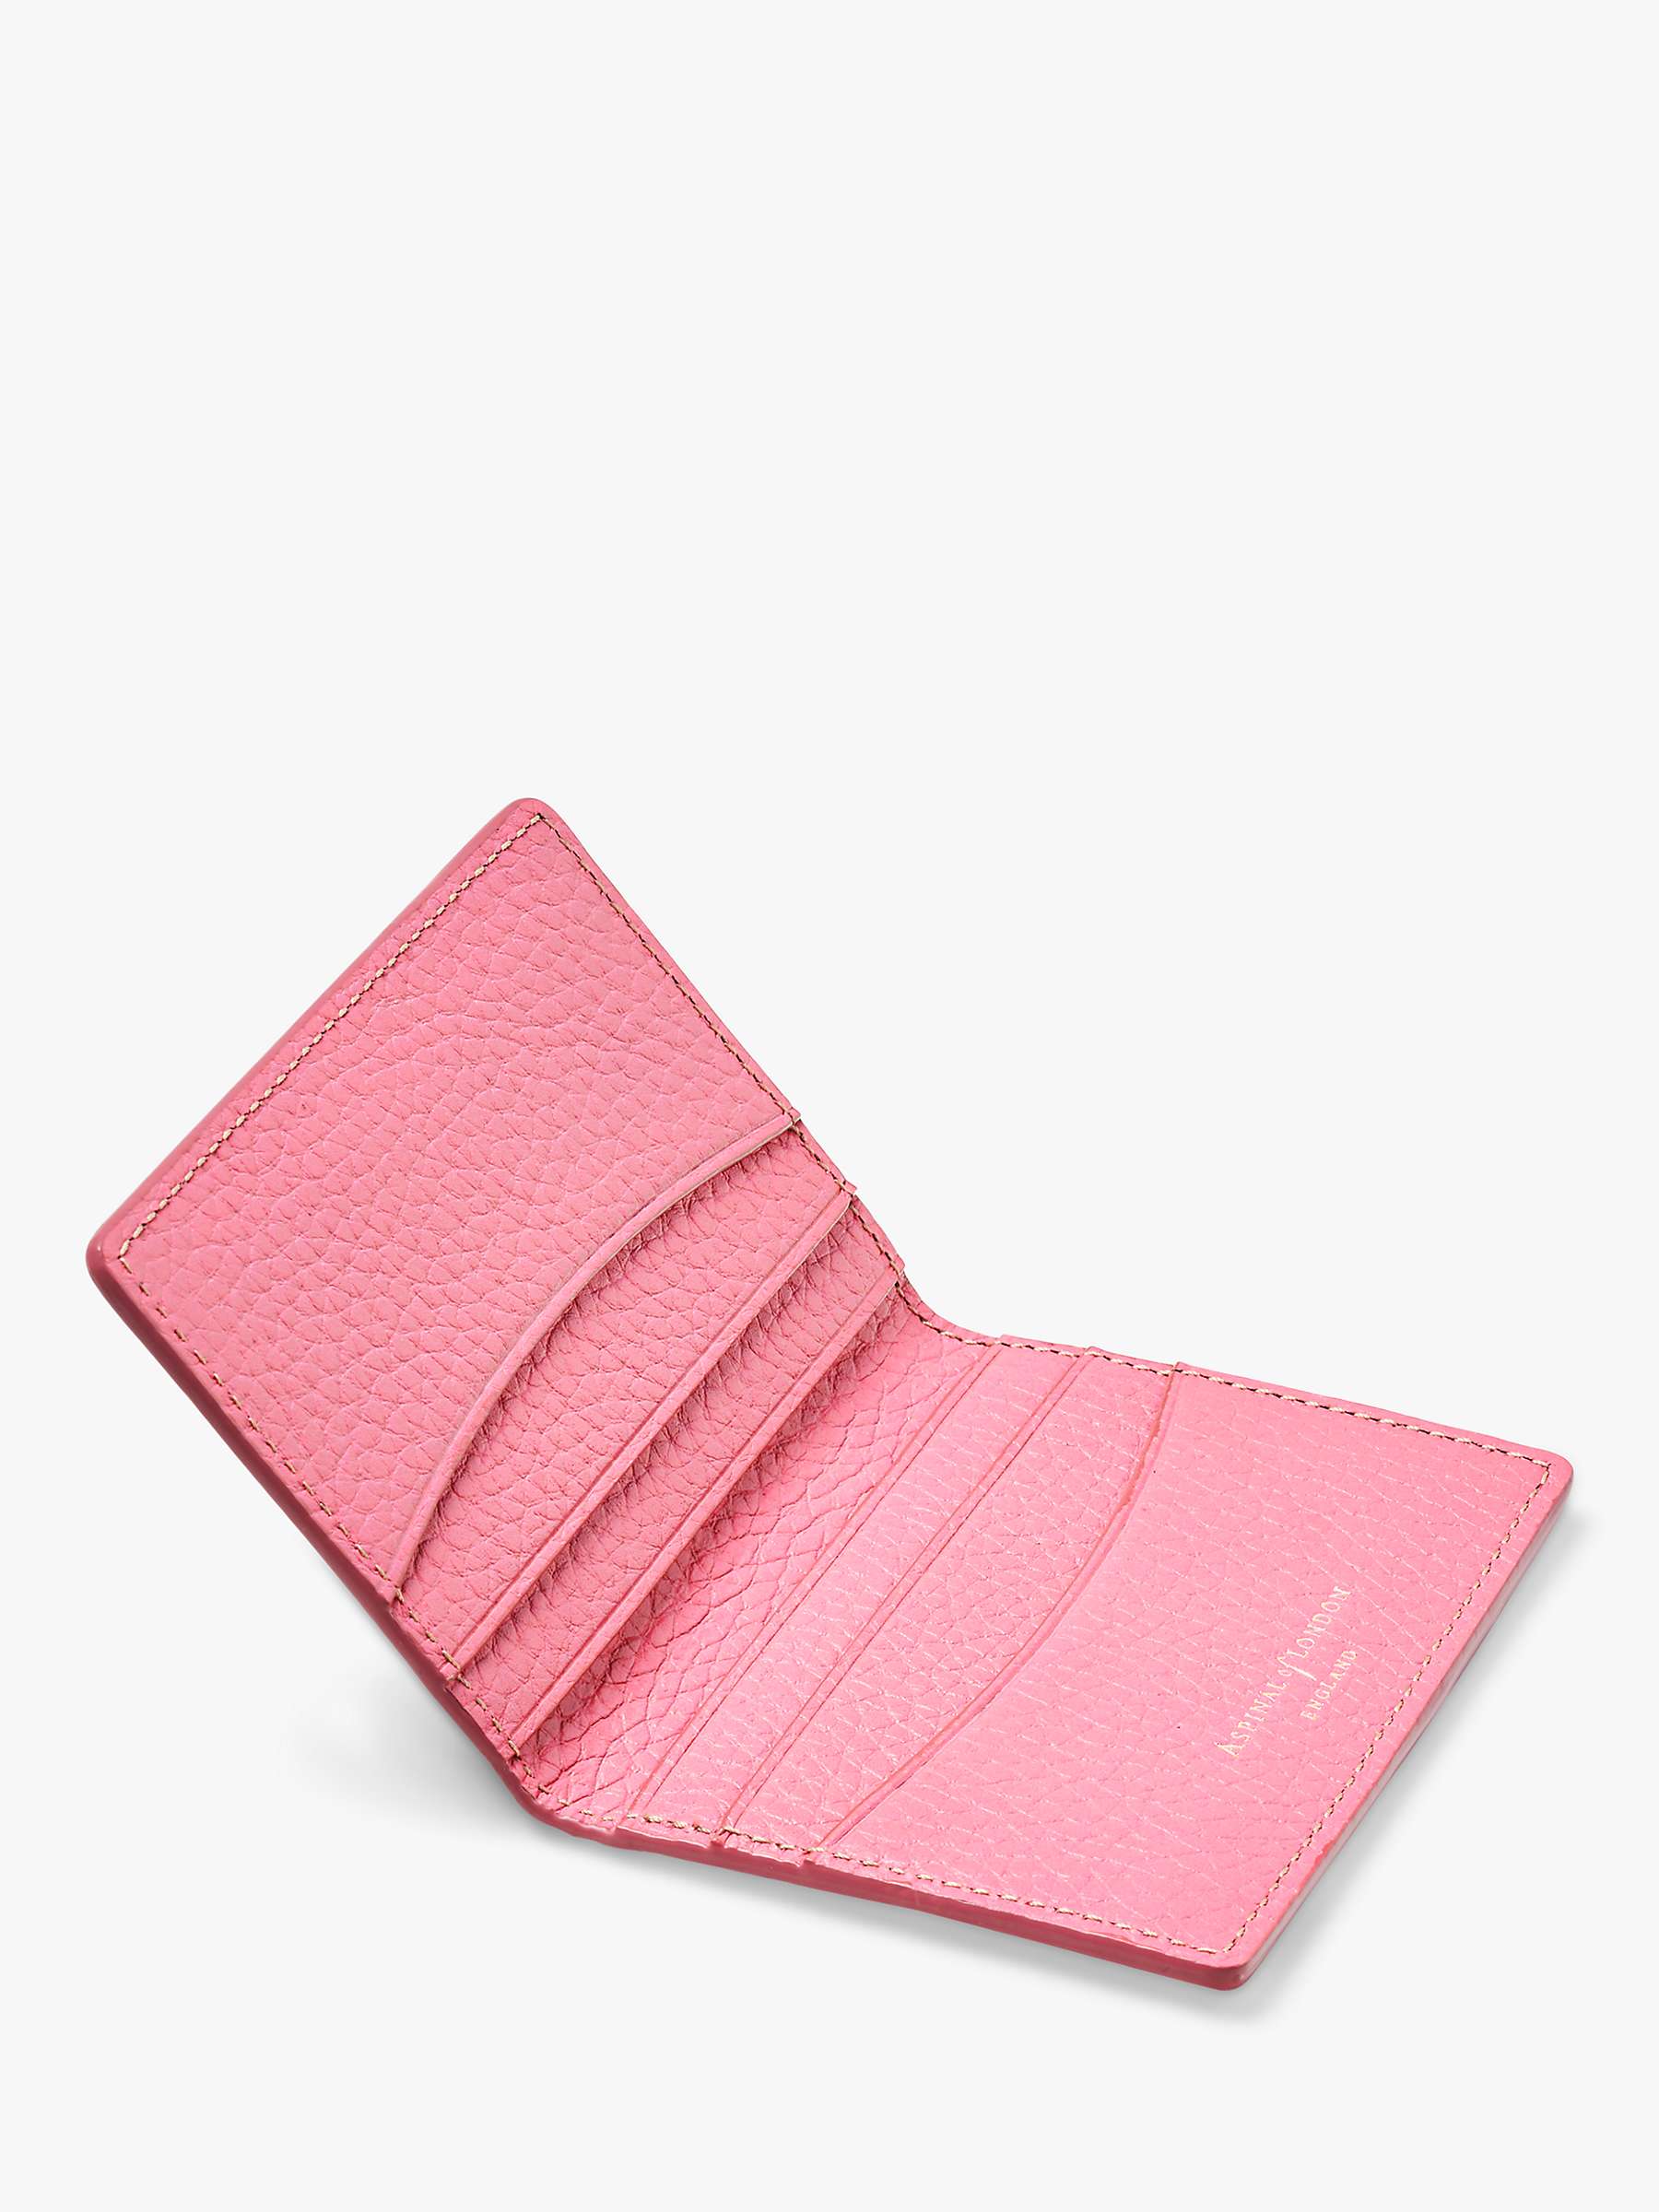 Buy Aspinal of London Double Fold Pebble Leather Credit Card Case Online at johnlewis.com